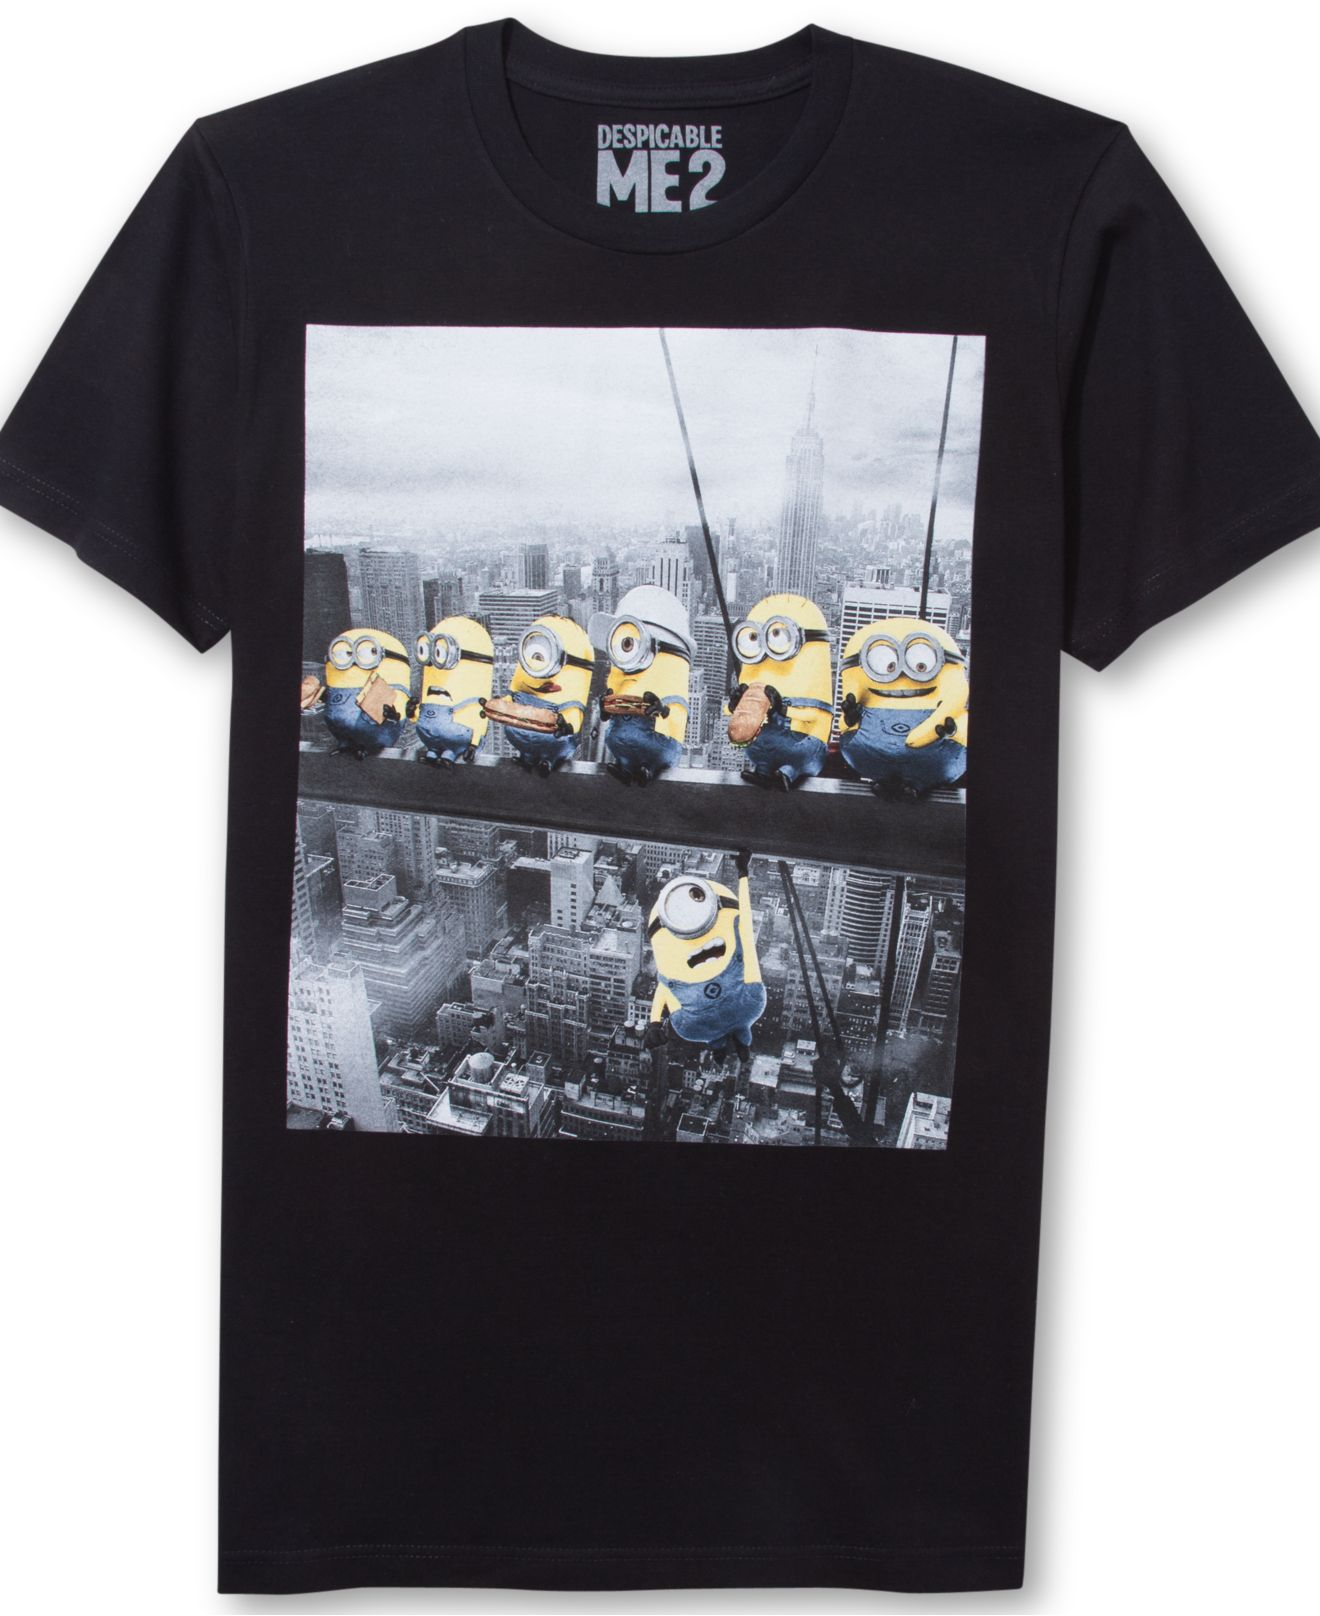 Lyst - Jem Despicable Me Graphic Tshirt in Black for Men